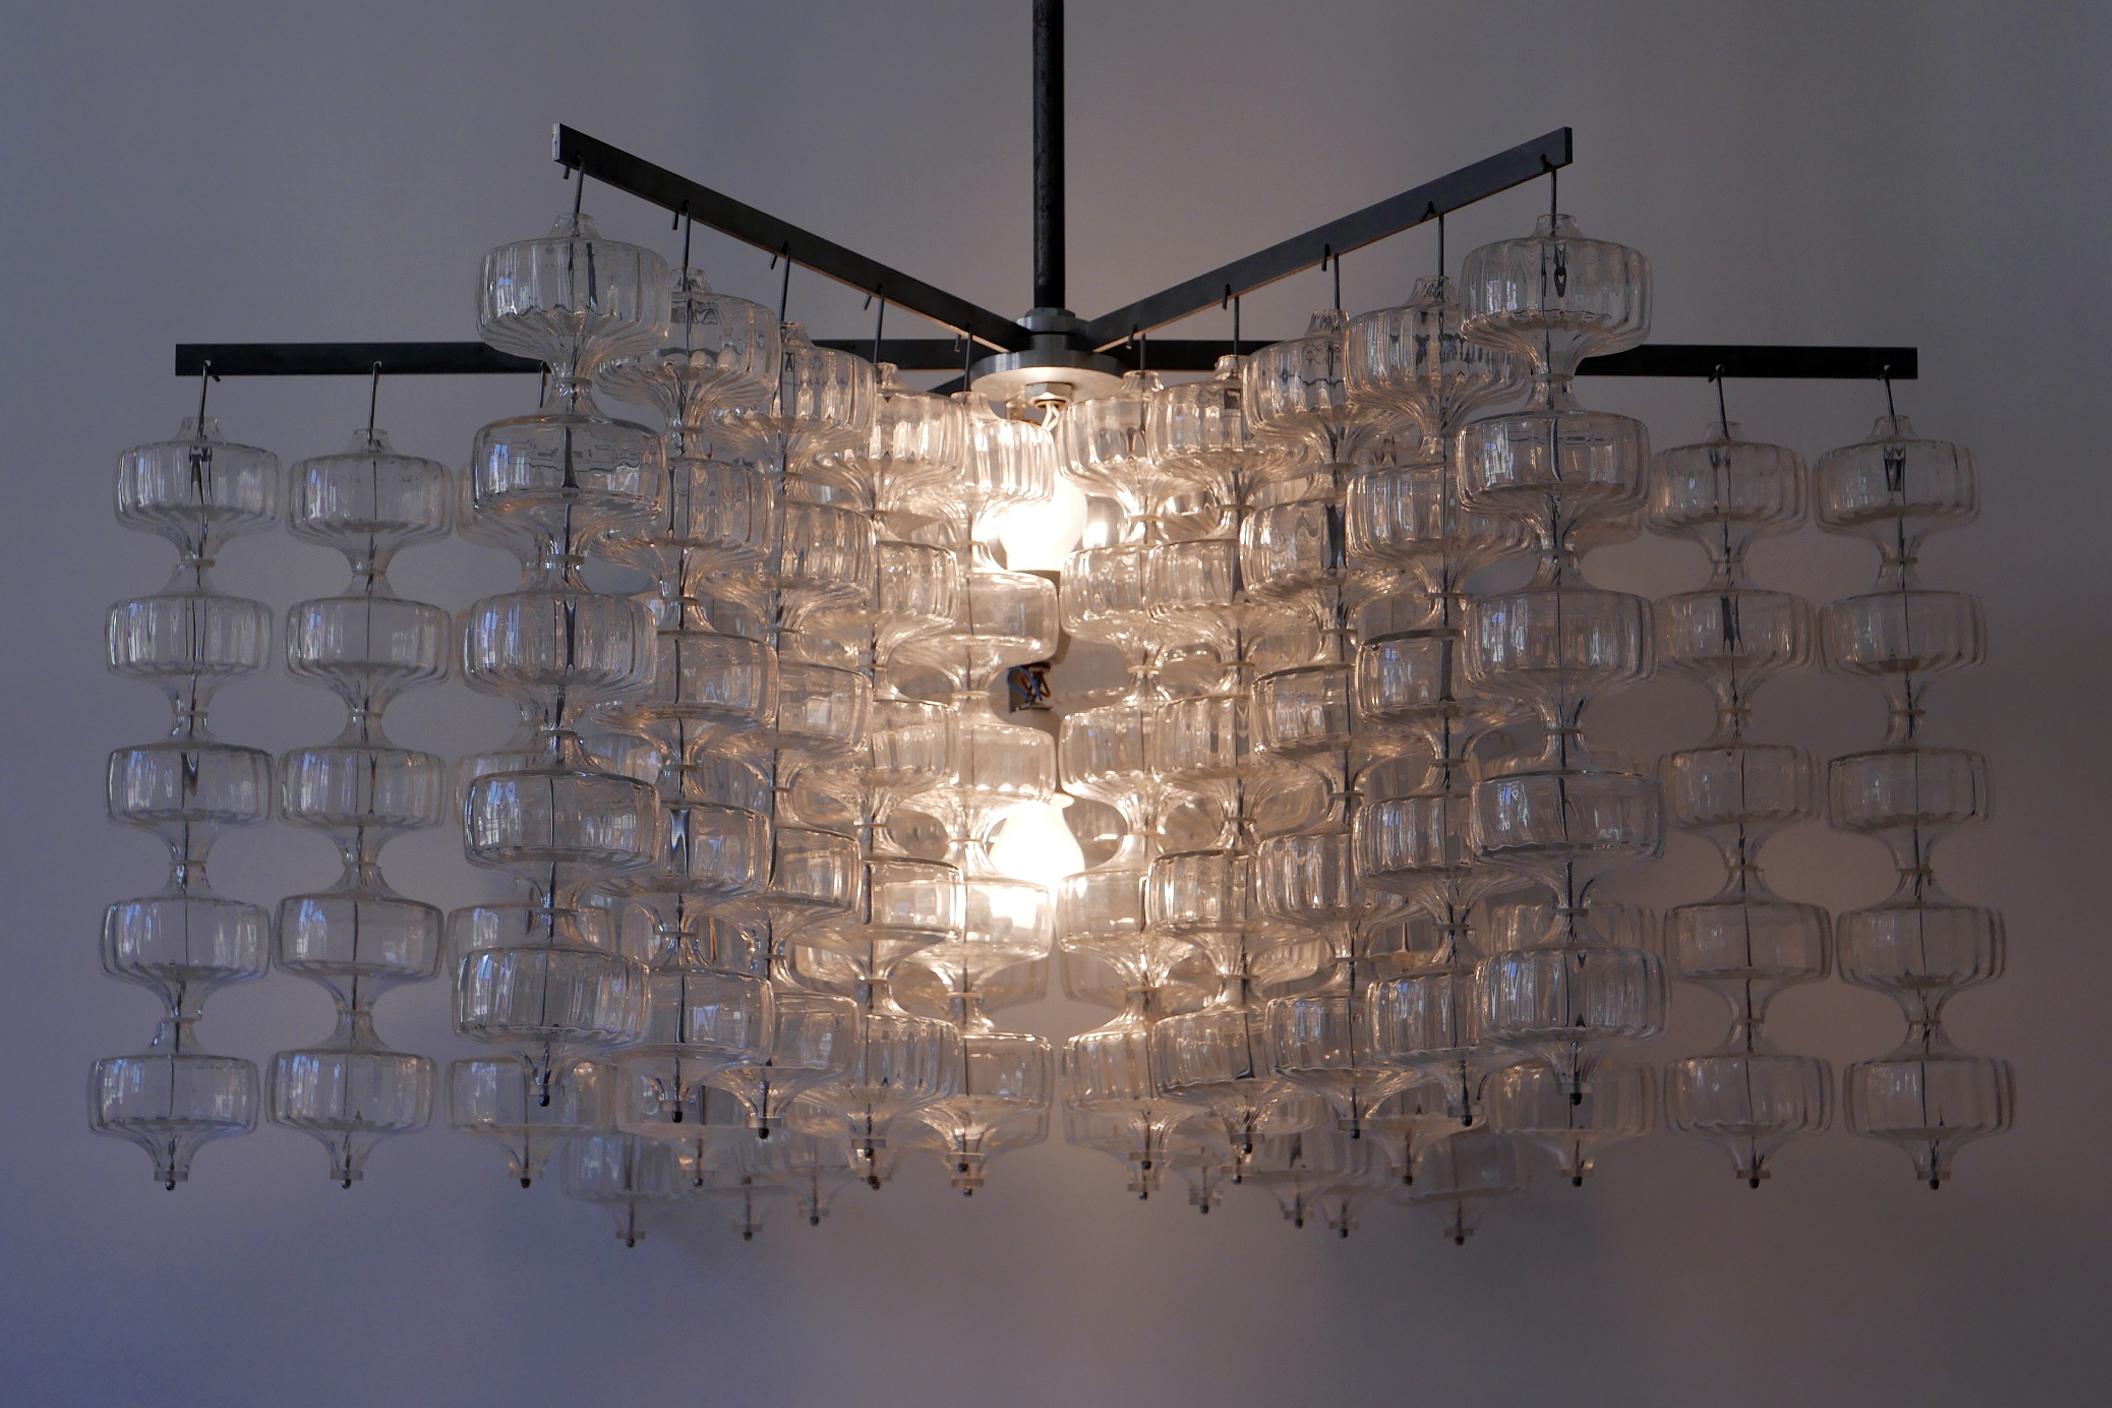 Huge, spectacular Mid-Century Modern chandelier or pendant lamp by Aloys Ferdinand Gangkofner, 1968, Germany.

Executed in hand blown glass, this exceptional chandelier comes with 150 glass elements which hang from 6 steel arms in five rows.
It